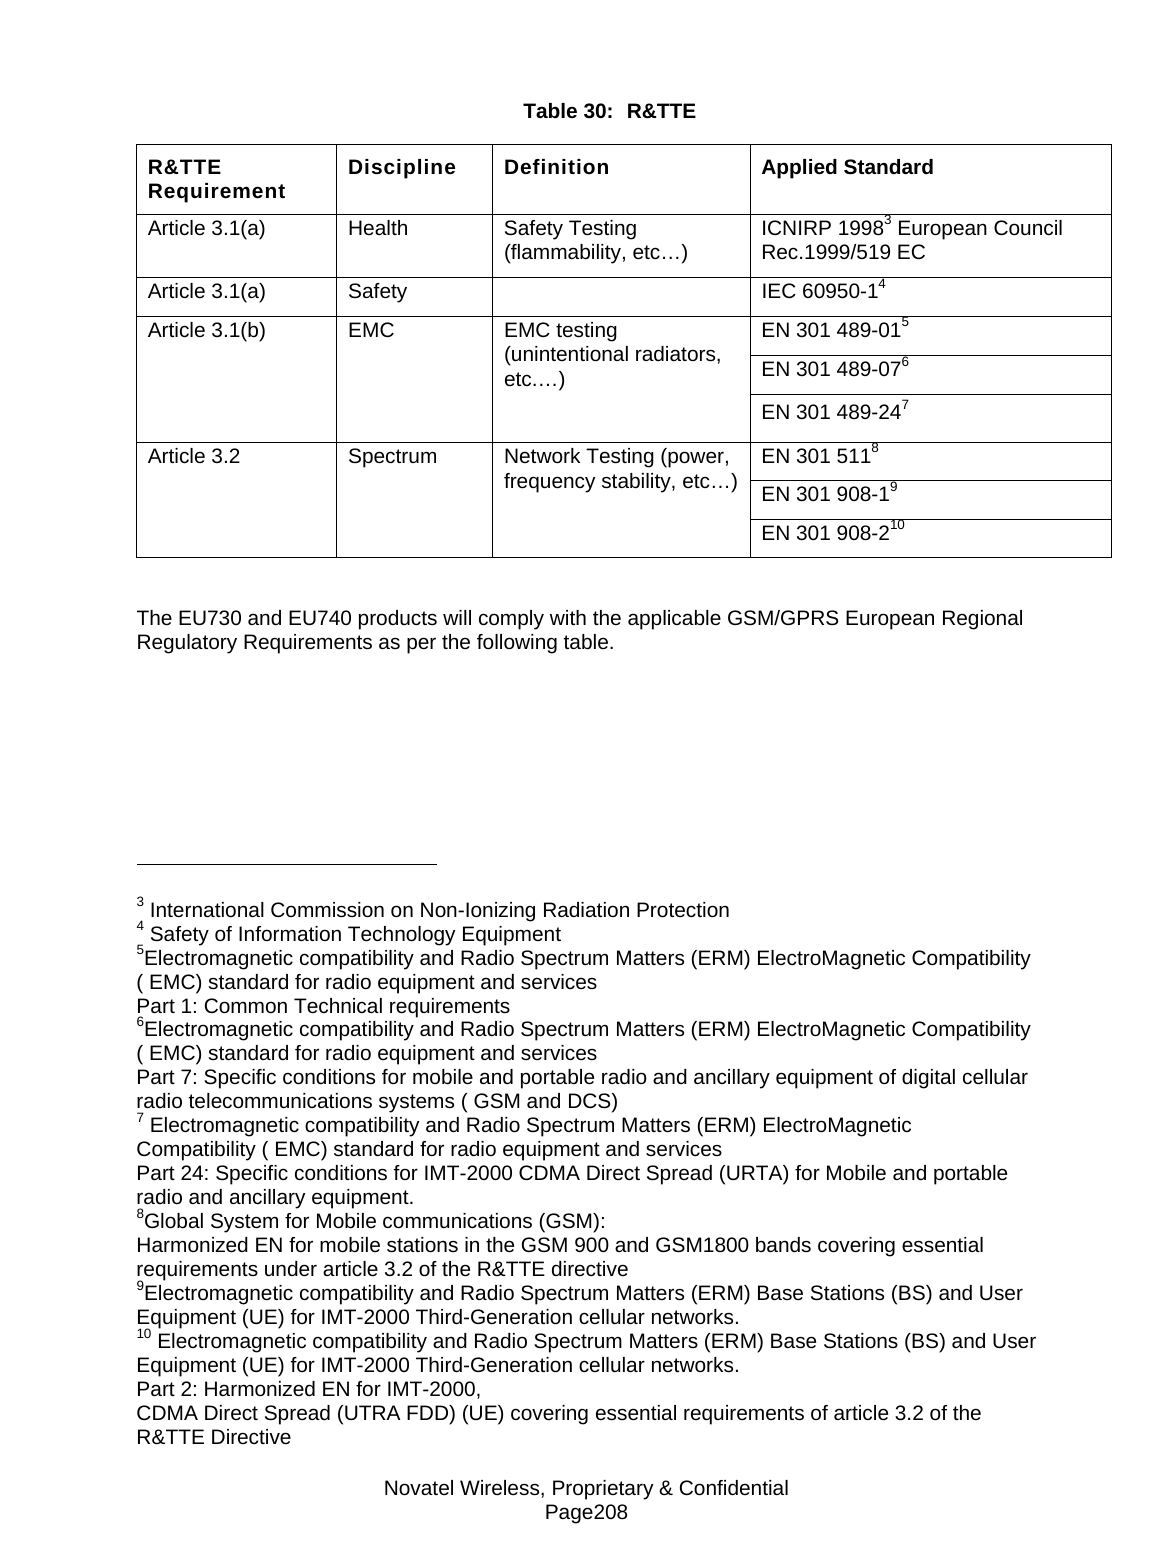 Novatel Wireless, Proprietary &amp; Confidential Page208 Table 30:  R&amp;TTE R&amp;TTE Requirement  Discipline  Definition  Applied Standard Article 3.1(a)  Health  Safety Testing (flammability, etc…)  ICNIRP 19983 European Council Rec.1999/519 EC Article 3.1(a)  Safety    IEC 60950-14 EN 301 489-015 EN 301 489-076 Article 3.1(b)  EMC  EMC testing (unintentional radiators, etc.…)  EN 301 489-247 EN 301 5118 EN 301 908-19 Article 3.2  Spectrum  Network Testing (power, frequency stability, etc…) EN 301 908-210   The EU730 and EU740 products will comply with the applicable GSM/GPRS European Regional Regulatory Requirements as per the following table.                                                        3 International Commission on Non-Ionizing Radiation Protection 4 Safety of Information Technology Equipment 5Electromagnetic compatibility and Radio Spectrum Matters (ERM) ElectroMagnetic Compatibility ( EMC) standard for radio equipment and services Part 1: Common Technical requirements 6Electromagnetic compatibility and Radio Spectrum Matters (ERM) ElectroMagnetic Compatibility ( EMC) standard for radio equipment and services Part 7: Specific conditions for mobile and portable radio and ancillary equipment of digital cellular radio telecommunications systems ( GSM and DCS) 7 Electromagnetic compatibility and Radio Spectrum Matters (ERM) ElectroMagnetic Compatibility ( EMC) standard for radio equipment and services Part 24: Specific conditions for IMT-2000 CDMA Direct Spread (URTA) for Mobile and portable radio and ancillary equipment. 8Global System for Mobile communications (GSM): Harmonized EN for mobile stations in the GSM 900 and GSM1800 bands covering essential requirements under article 3.2 of the R&amp;TTE directive 9Electromagnetic compatibility and Radio Spectrum Matters (ERM) Base Stations (BS) and User Equipment (UE) for IMT-2000 Third-Generation cellular networks.  10 Electromagnetic compatibility and Radio Spectrum Matters (ERM) Base Stations (BS) and User Equipment (UE) for IMT-2000 Third-Generation cellular networks. Part 2: Harmonized EN for IMT-2000, CDMA Direct Spread (UTRA FDD) (UE) covering essential requirements of article 3.2 of the R&amp;TTE Directive 